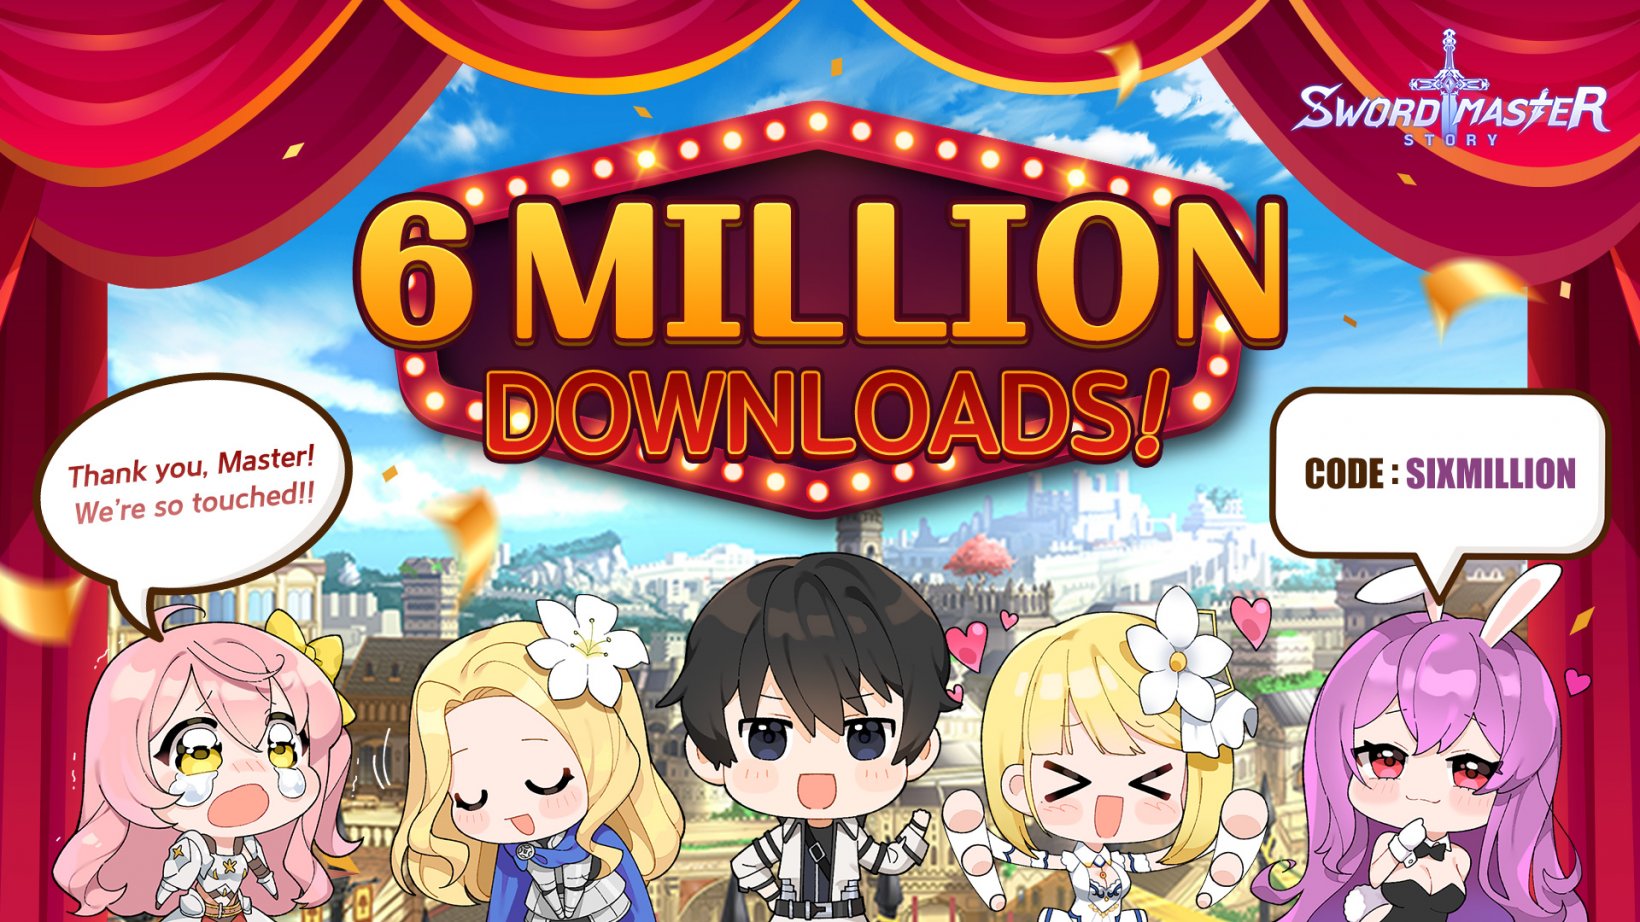 SwordMaster Story is celebrating six million downloads with a new hero and numerous events